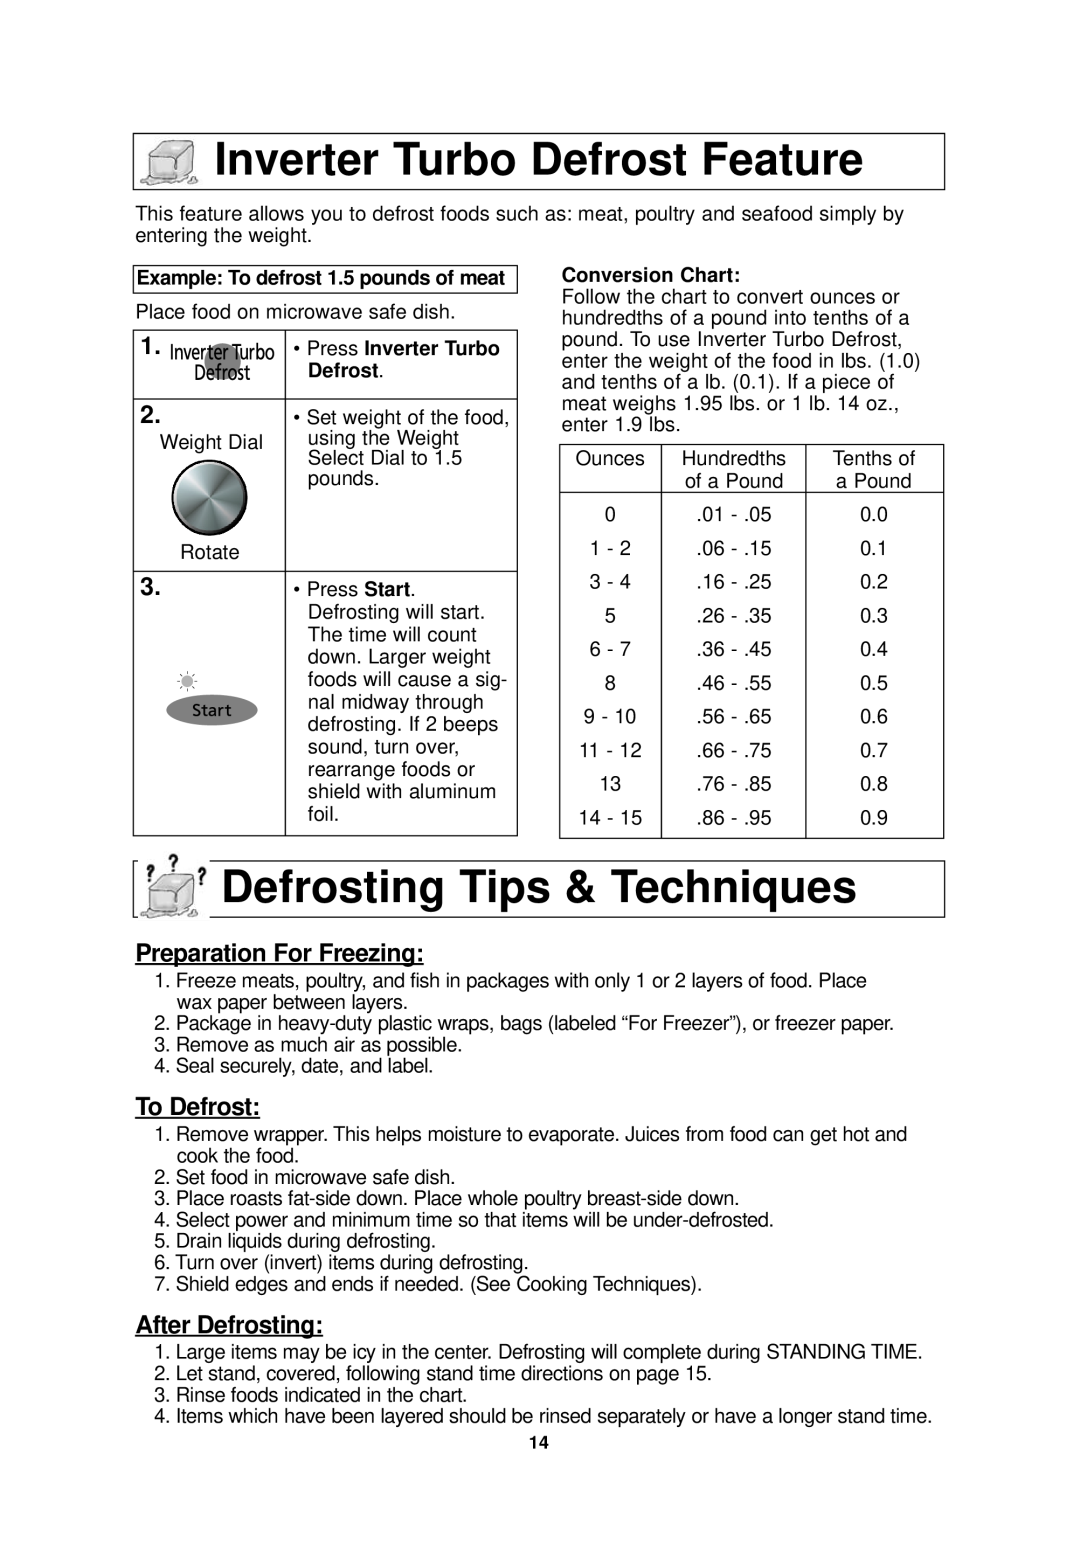 Panasonic NN-SD978 Inverter Turbo Defrost Feature, Defrosting Tips & Techniques, Preparation For Freezing, To Defrost 